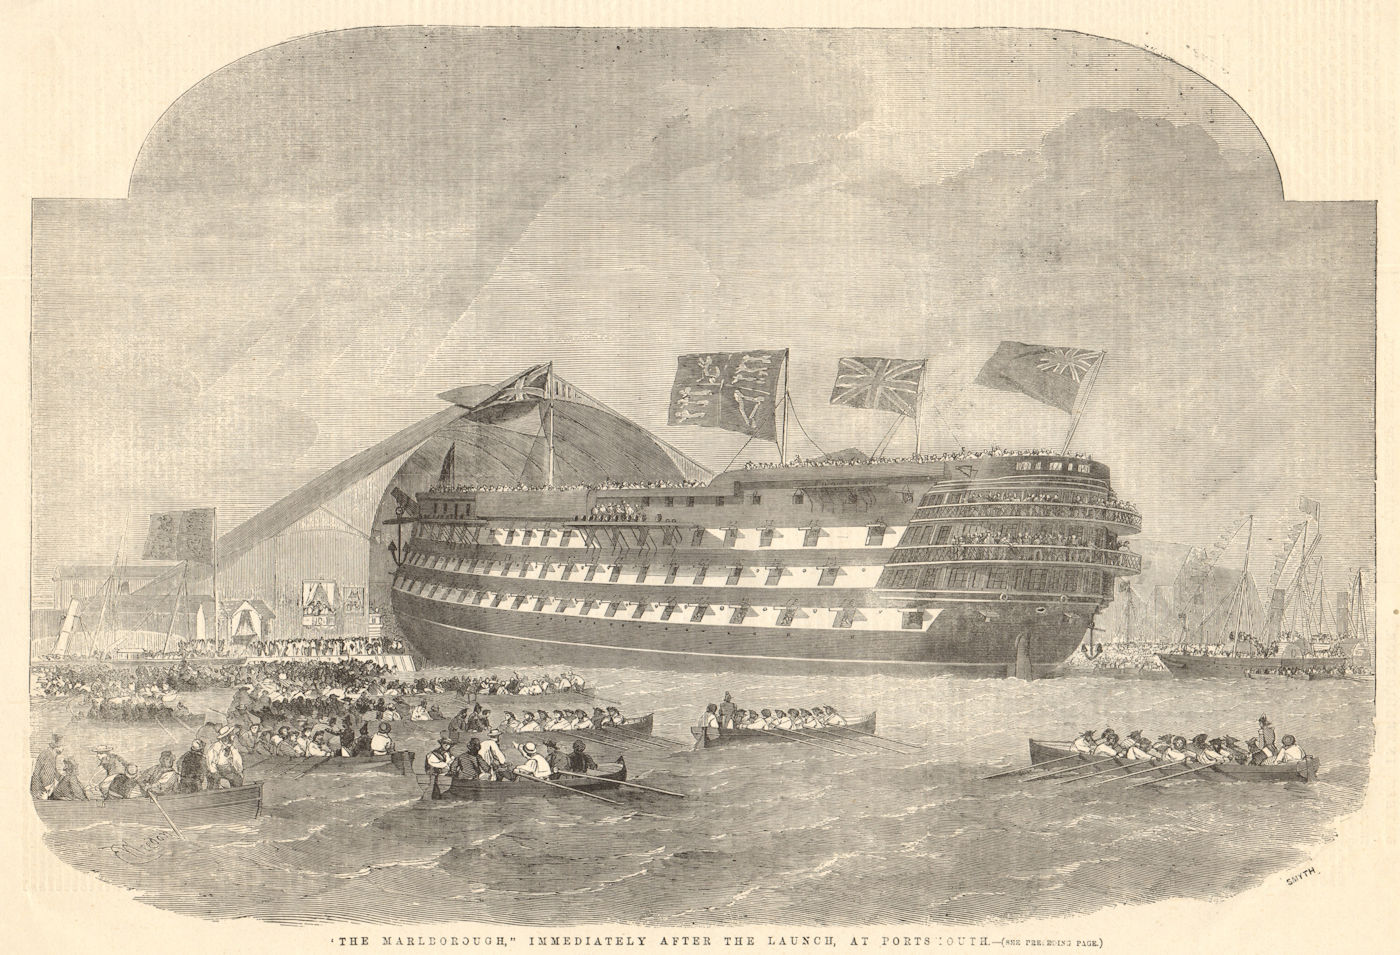 Associate Product The Marlborough, immediately after the launch, at Portsmouth. Ships 1855 print